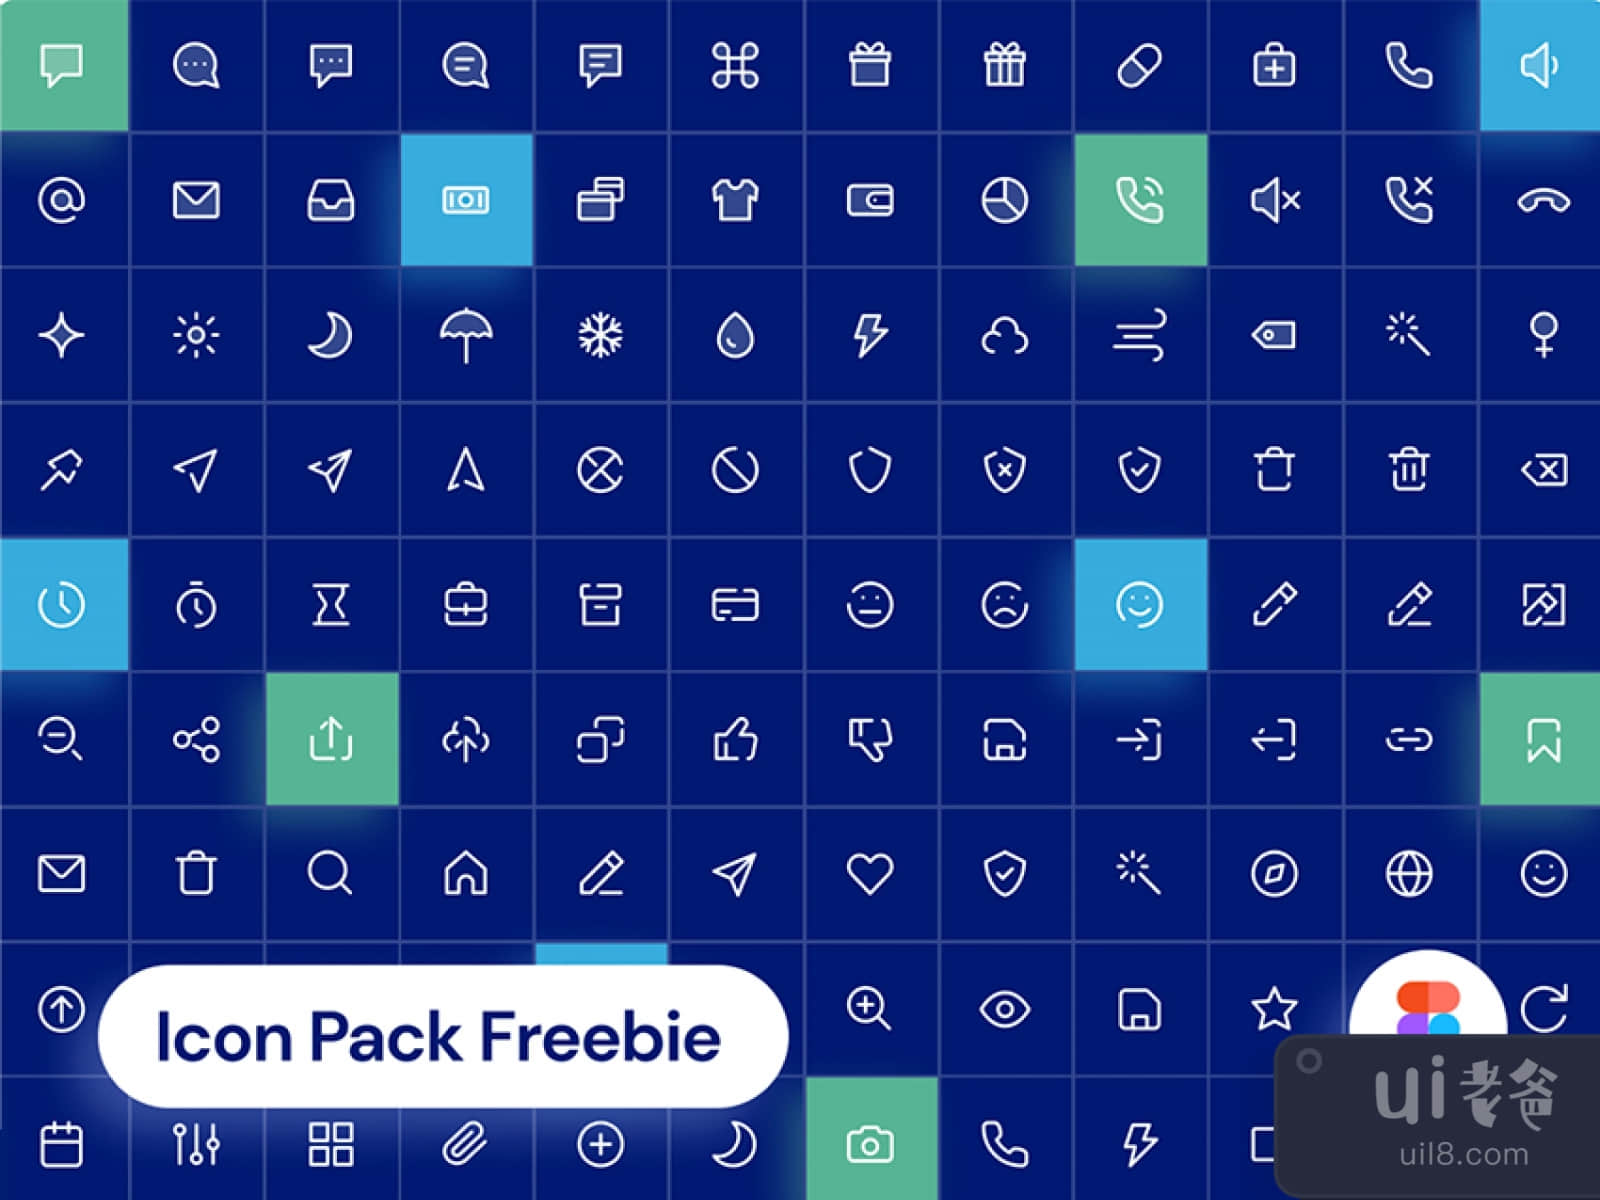 300 Unique Icons Pack for Figma and Adobe XD No 1